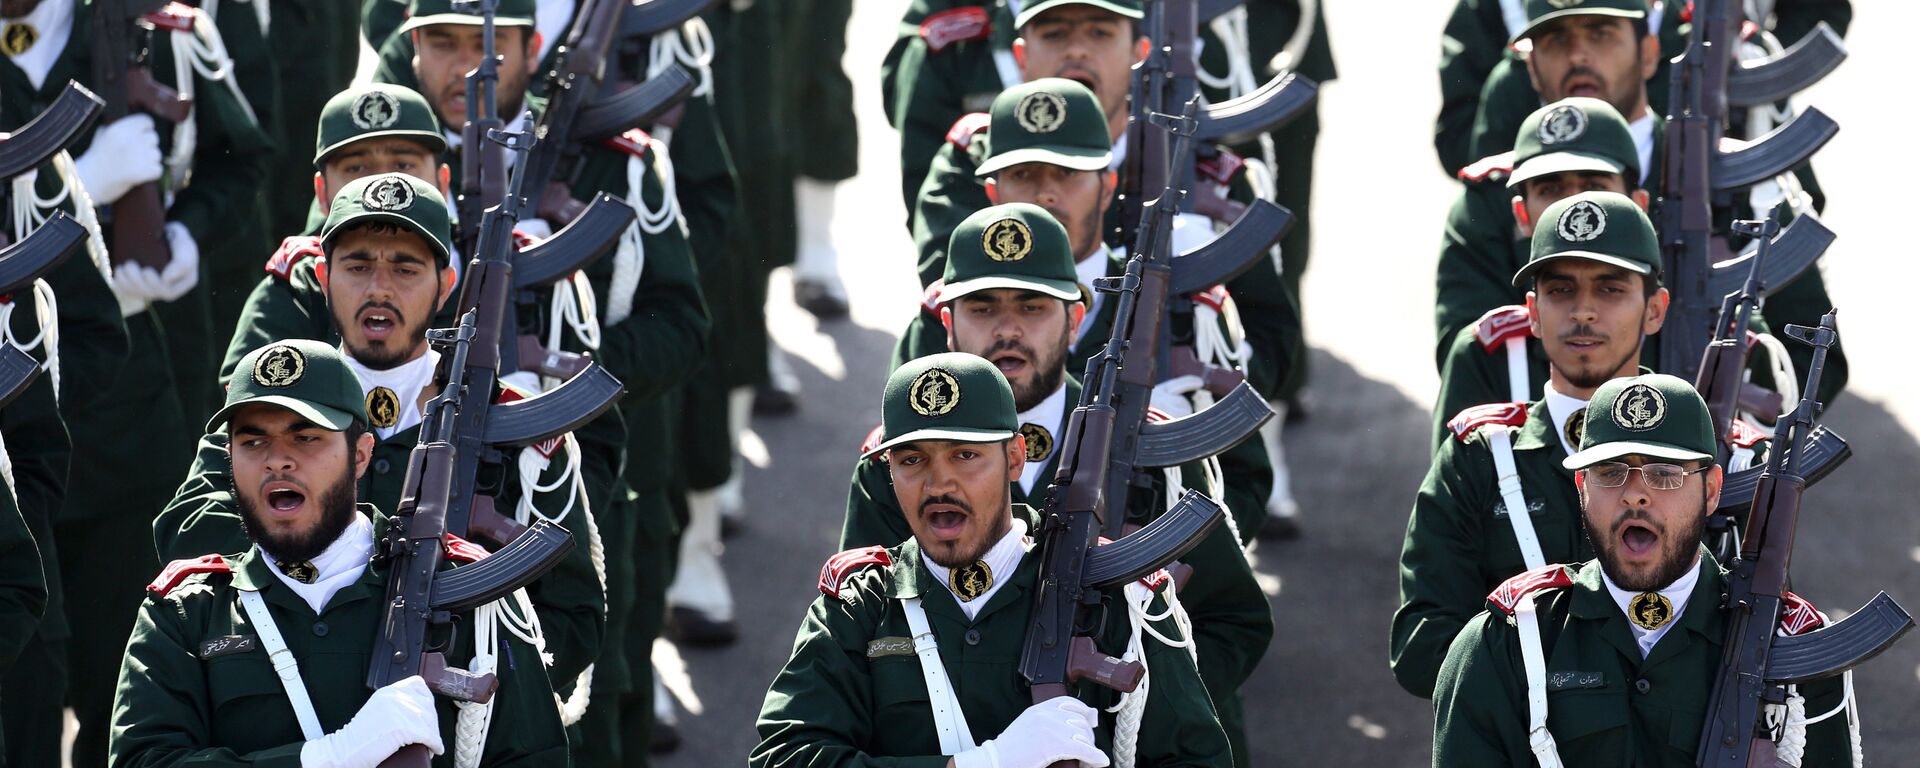 Members of the Iran's Revolutionary Guard march during an annual military parade marking the 34th anniversary of outset of the 1980-88 Iran-Iraq war, in front of the mausoleum of the late revolutionary founder Ayatollah Khomeini just outside Tehran, Iran, Monday, Sept. 22, 2014 - Sputnik International, 1920, 30.09.2021